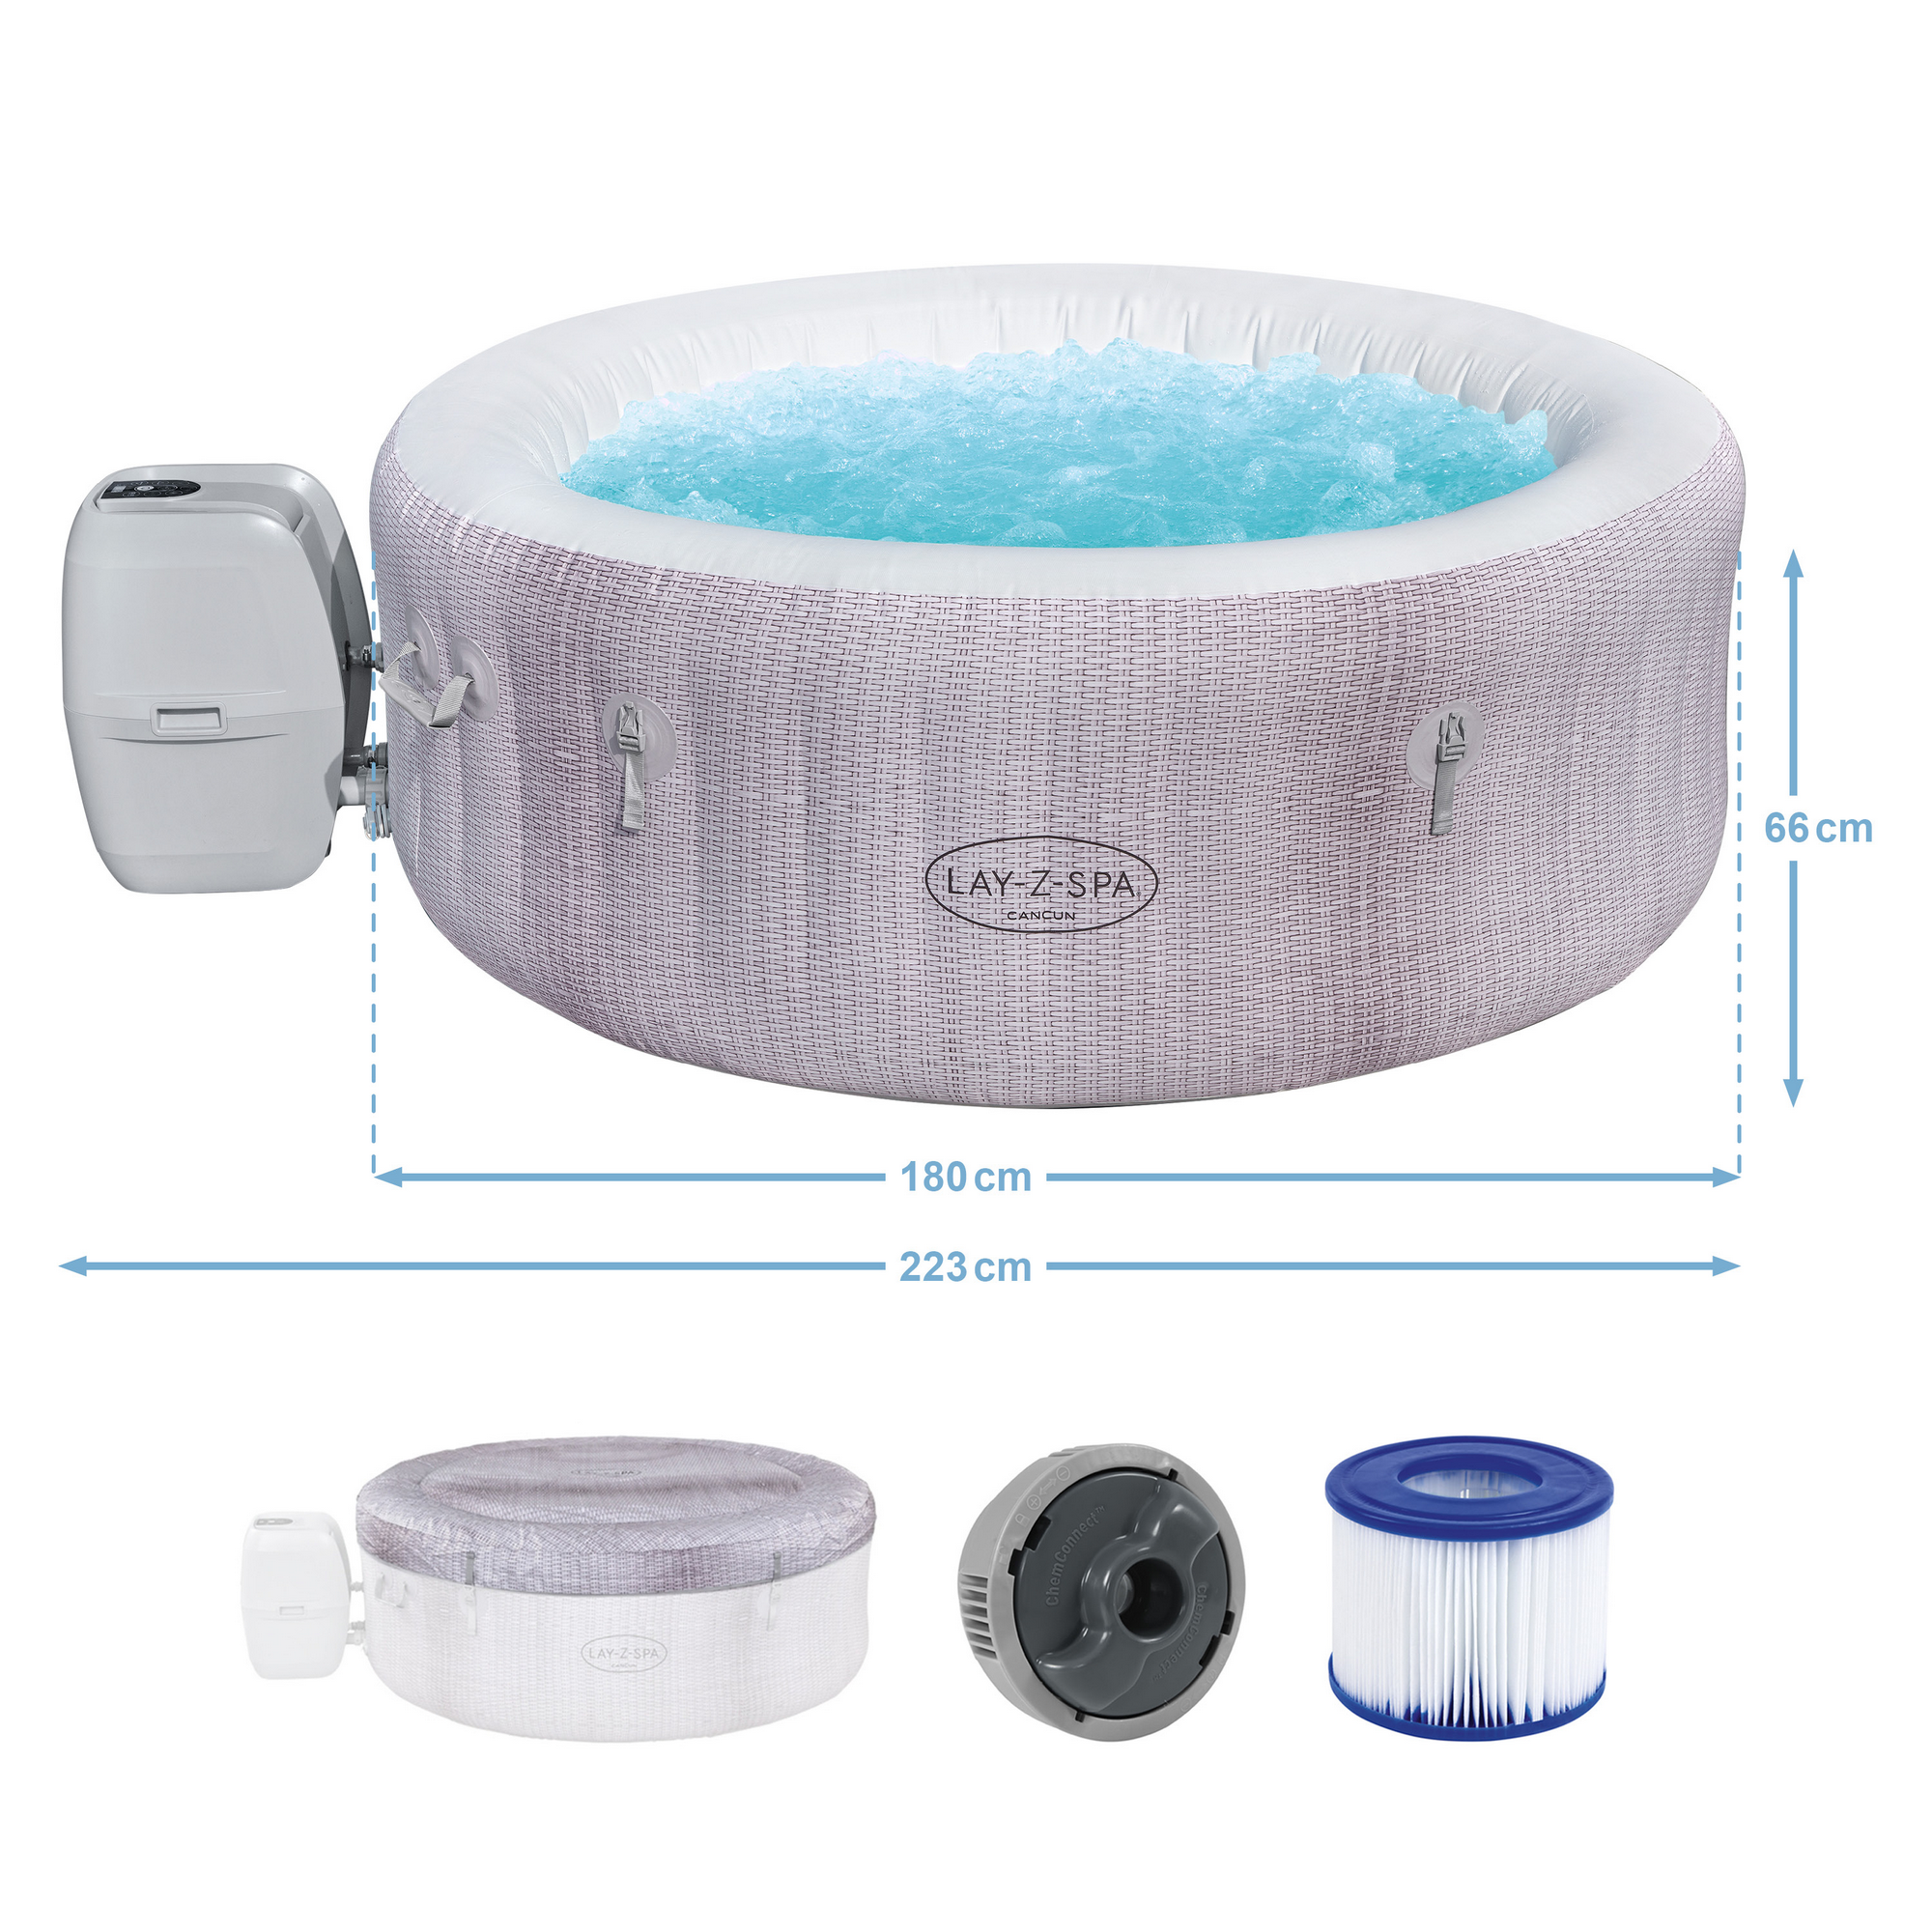 Whirlpool 'Lay-Z-Spa™ Cancun AirJet' altrosa/weiß Ø 180 x 66 cm + product picture